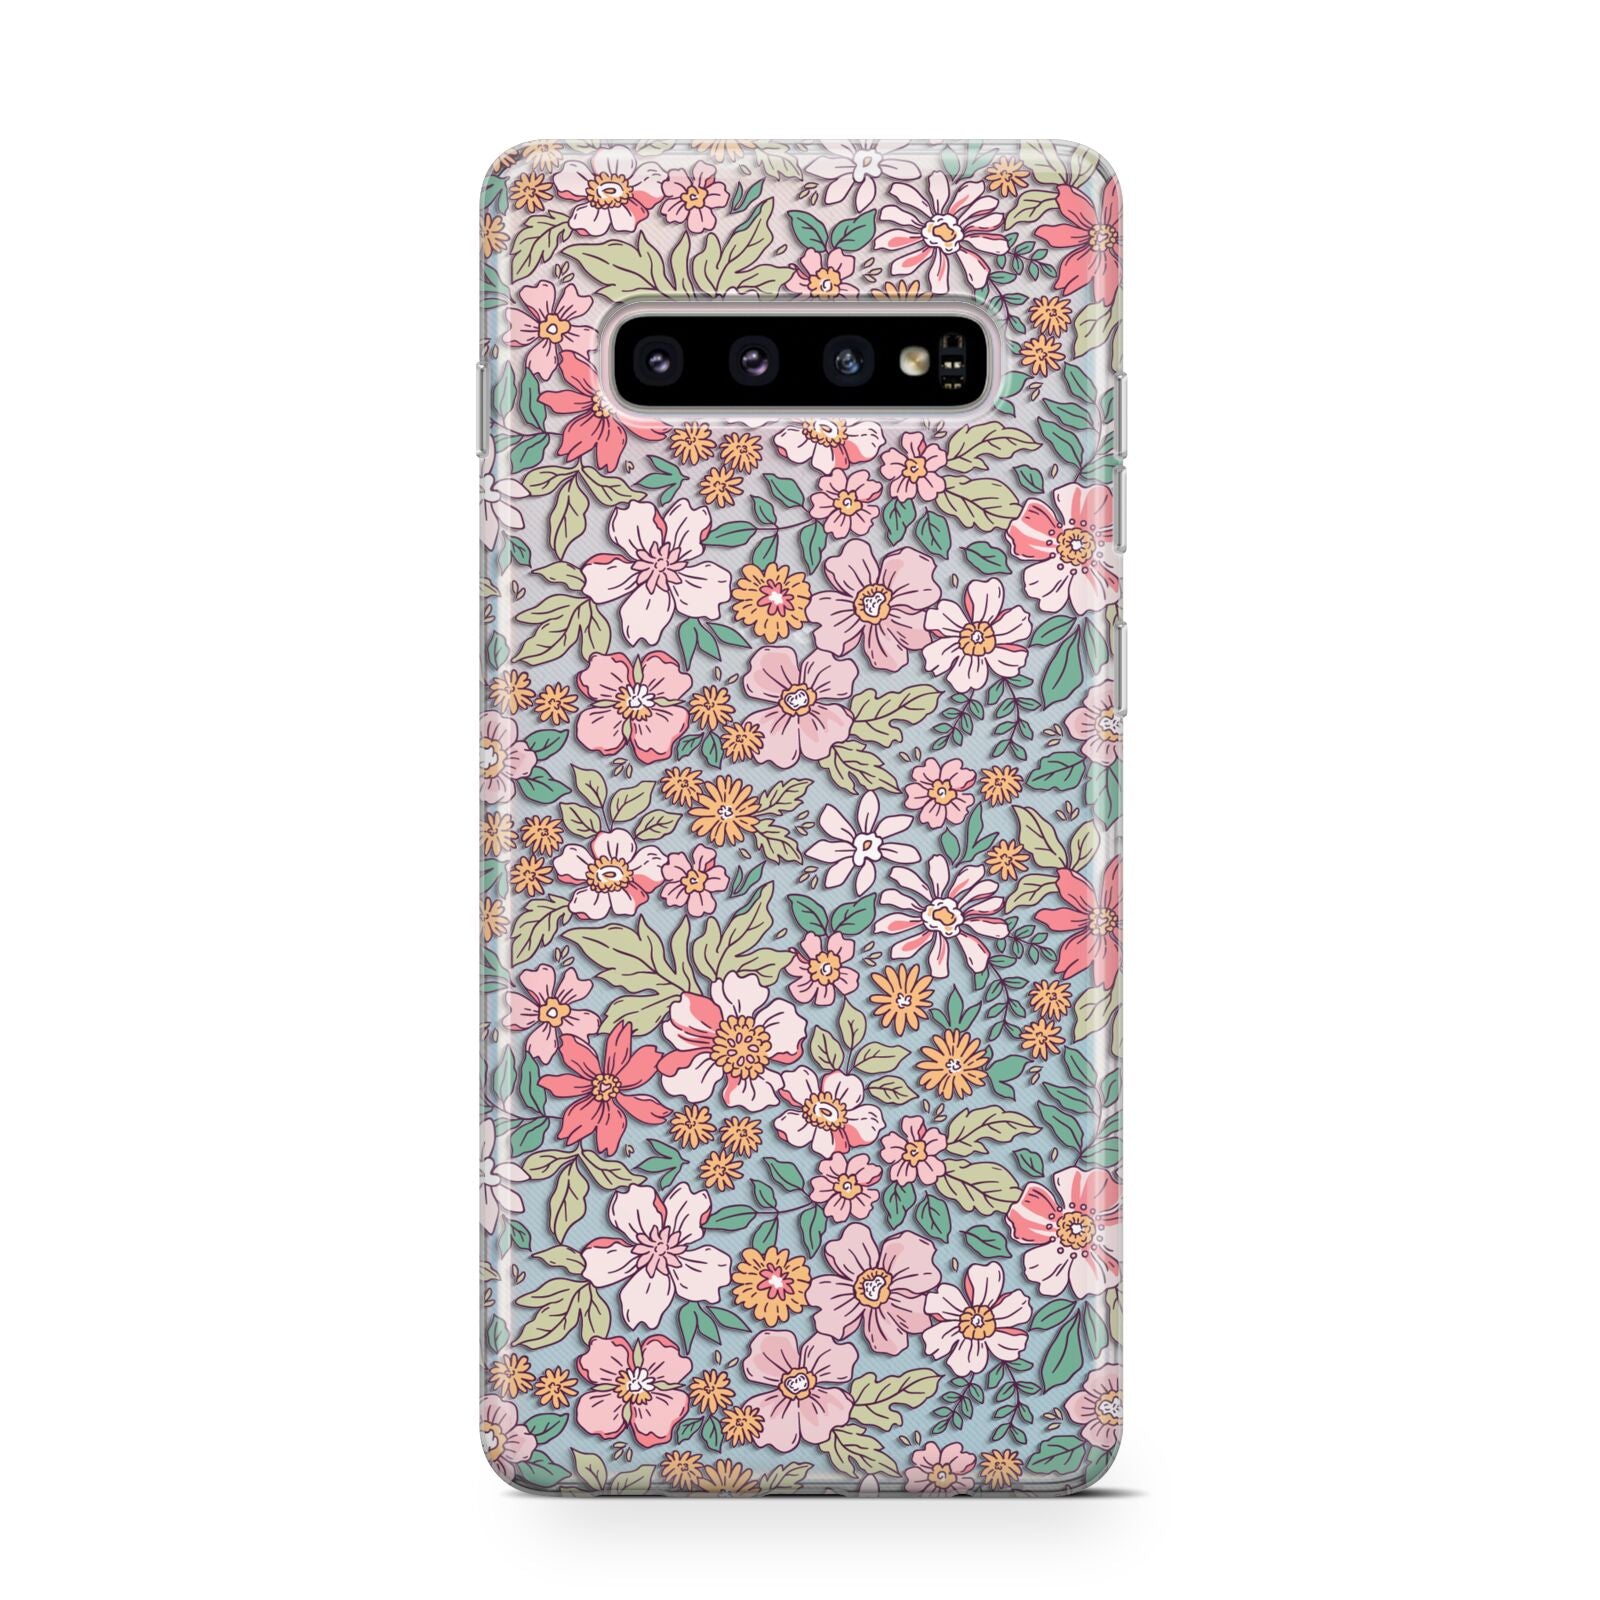 Small Floral Pattern Samsung Galaxy S10 Case